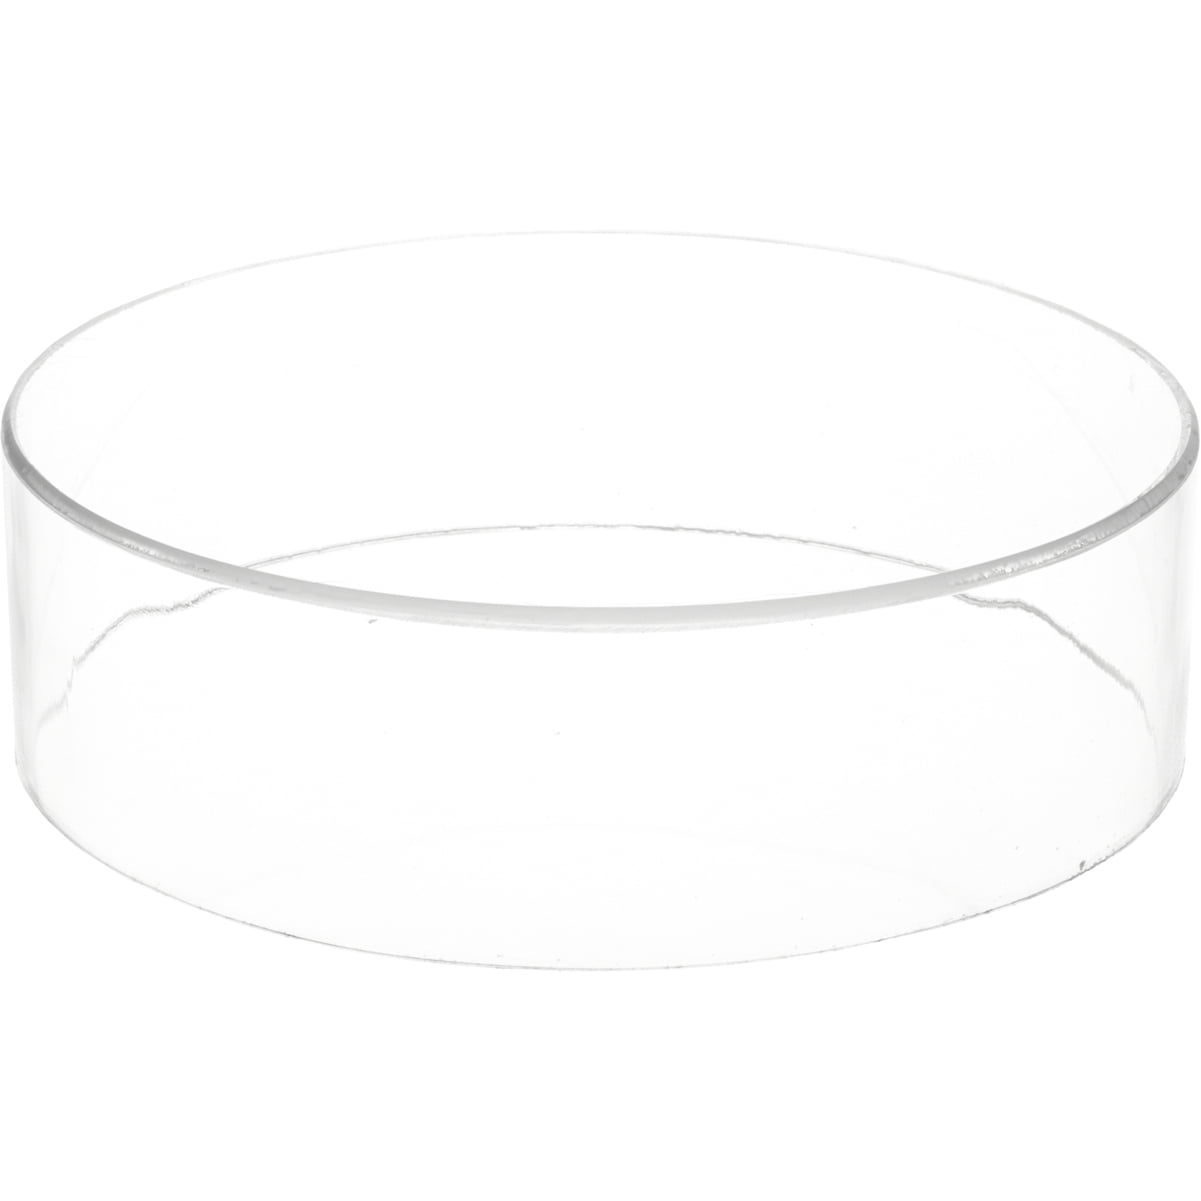 2 inches x 5 inches Height Depth Plymor Clear Acrylic Round Cylinder Display Riser 